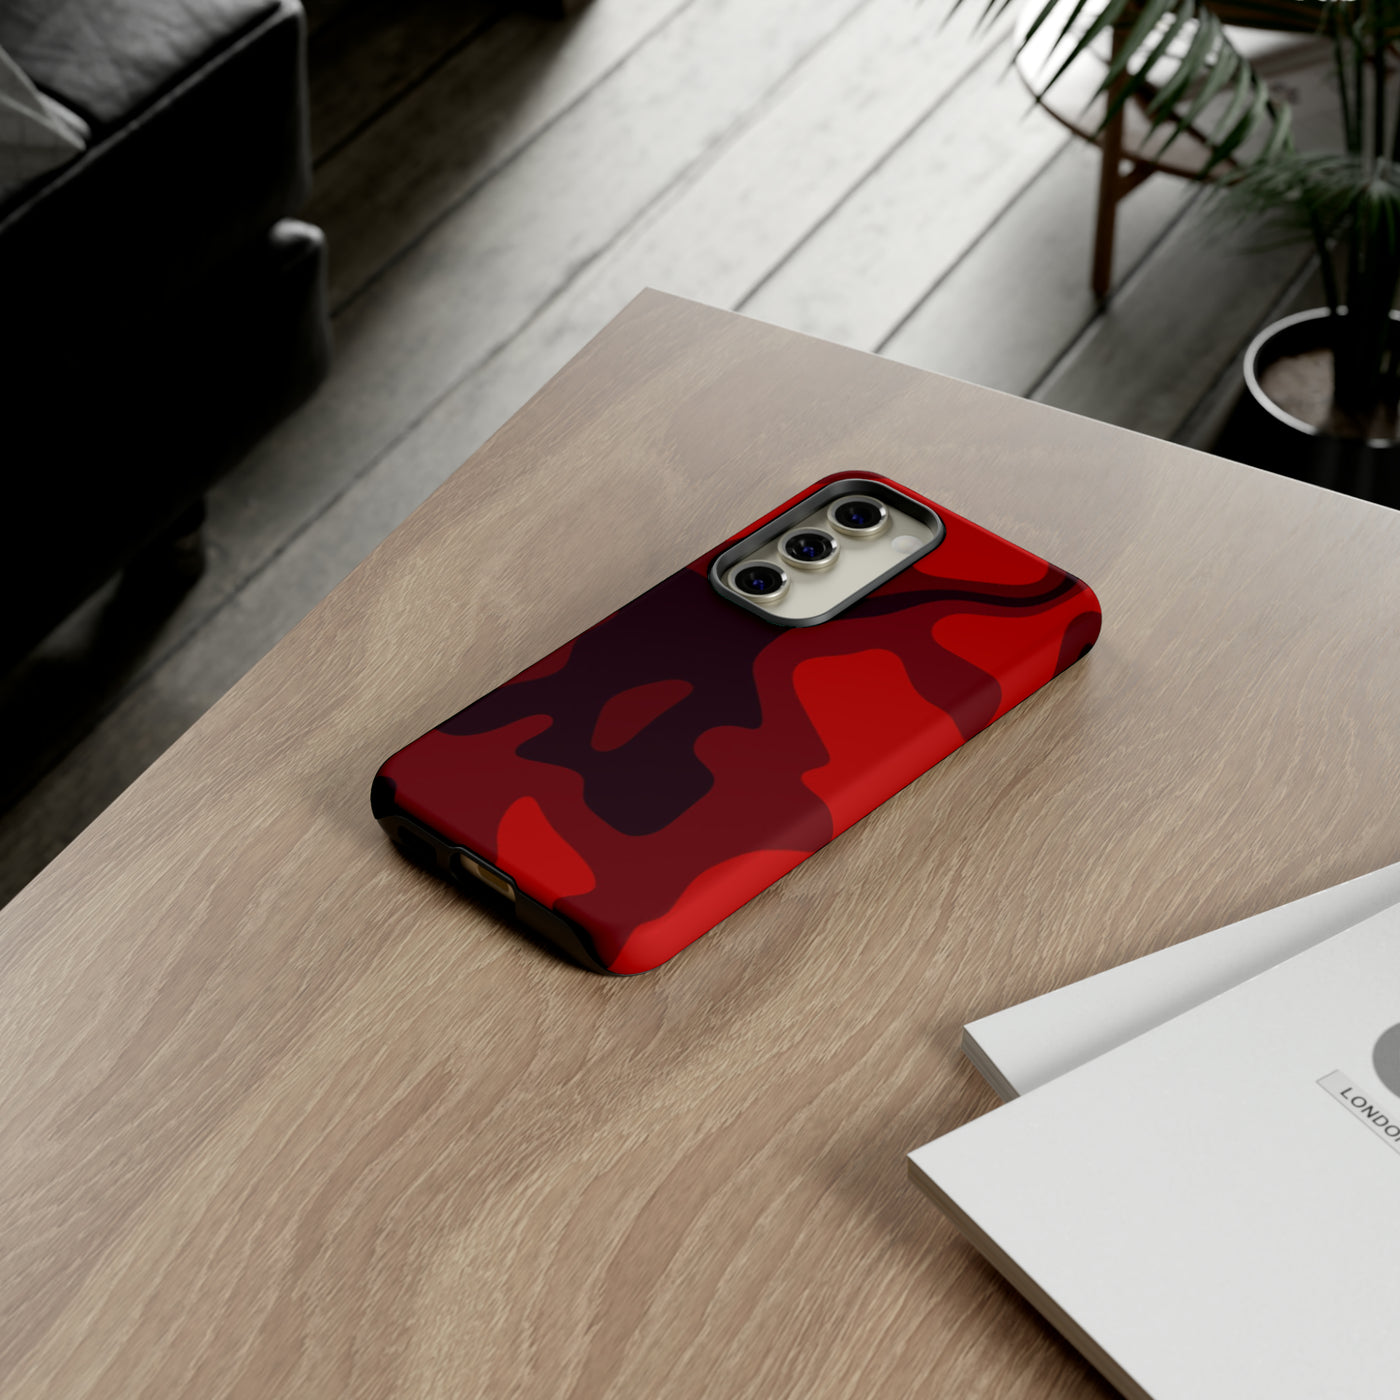 Cool Samsung Phone Case | Aesthetic Samsung Phone Case | Camouflage Red Black| Galaxy S23, S22, S21, S20 | Luxury Double Layer | Cute